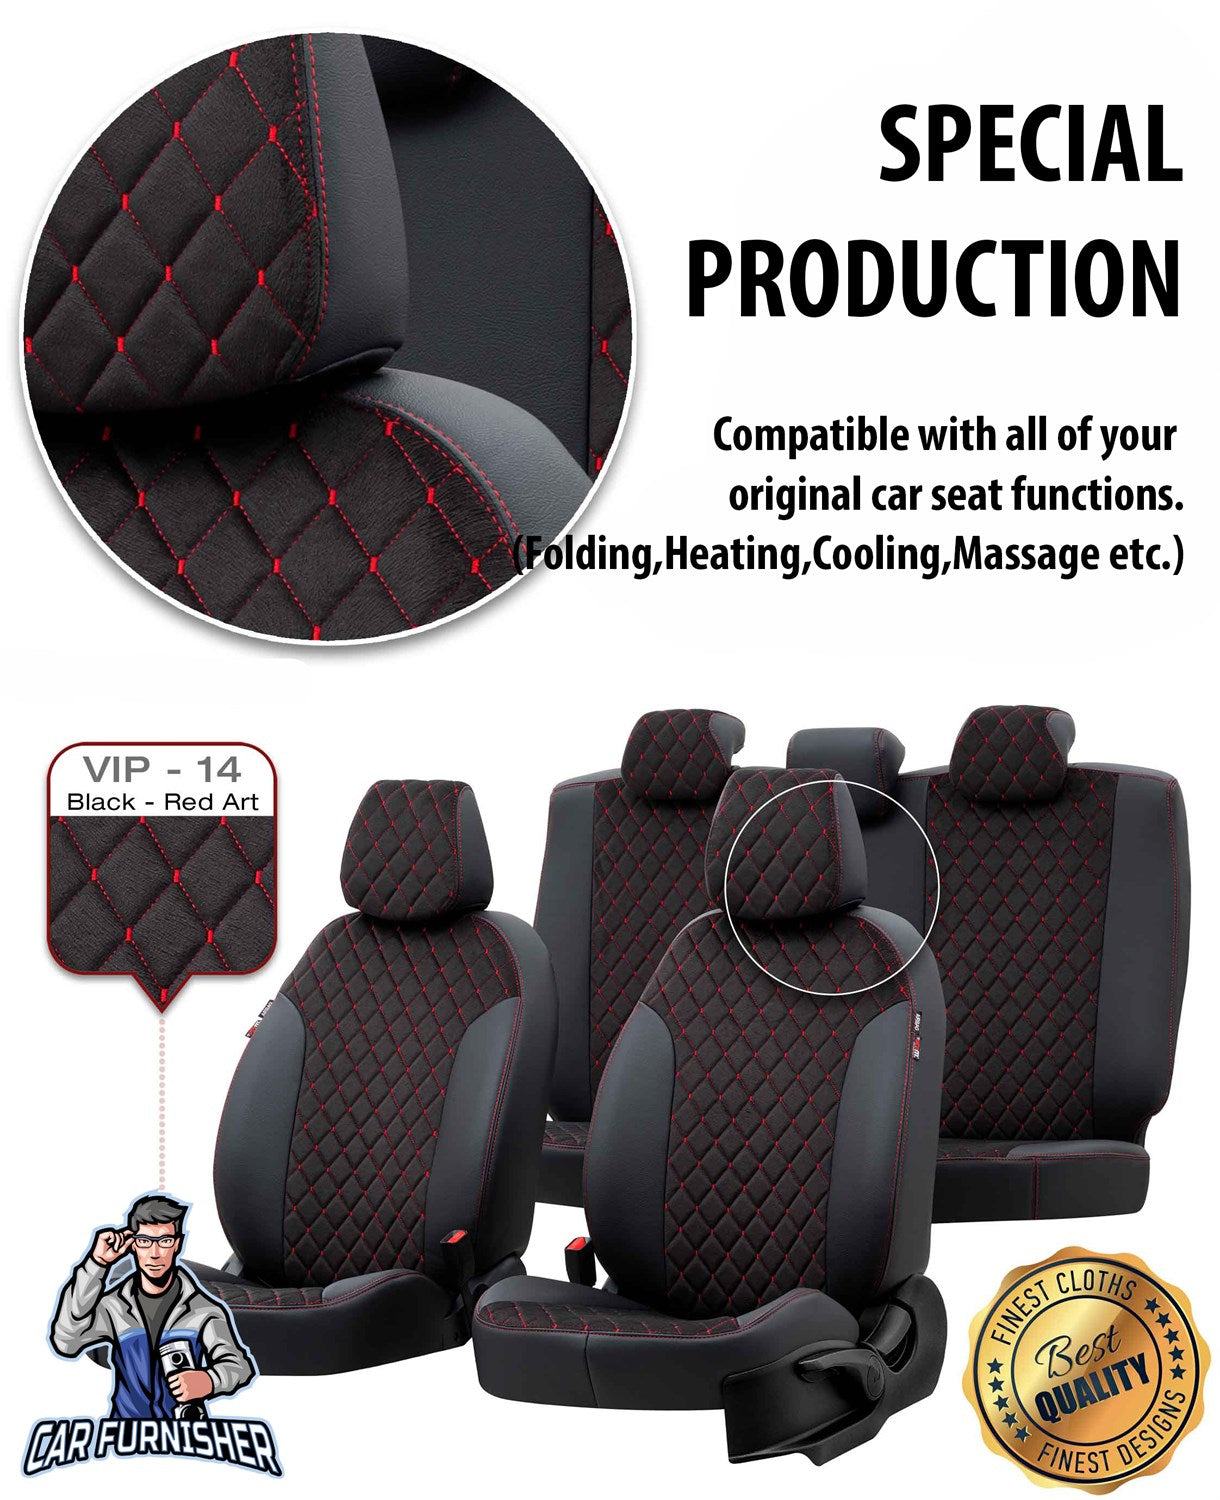 Skoda Roomstar Seat Cover Madrid Foal Feather Design Dark Red Leather & Foal Feather